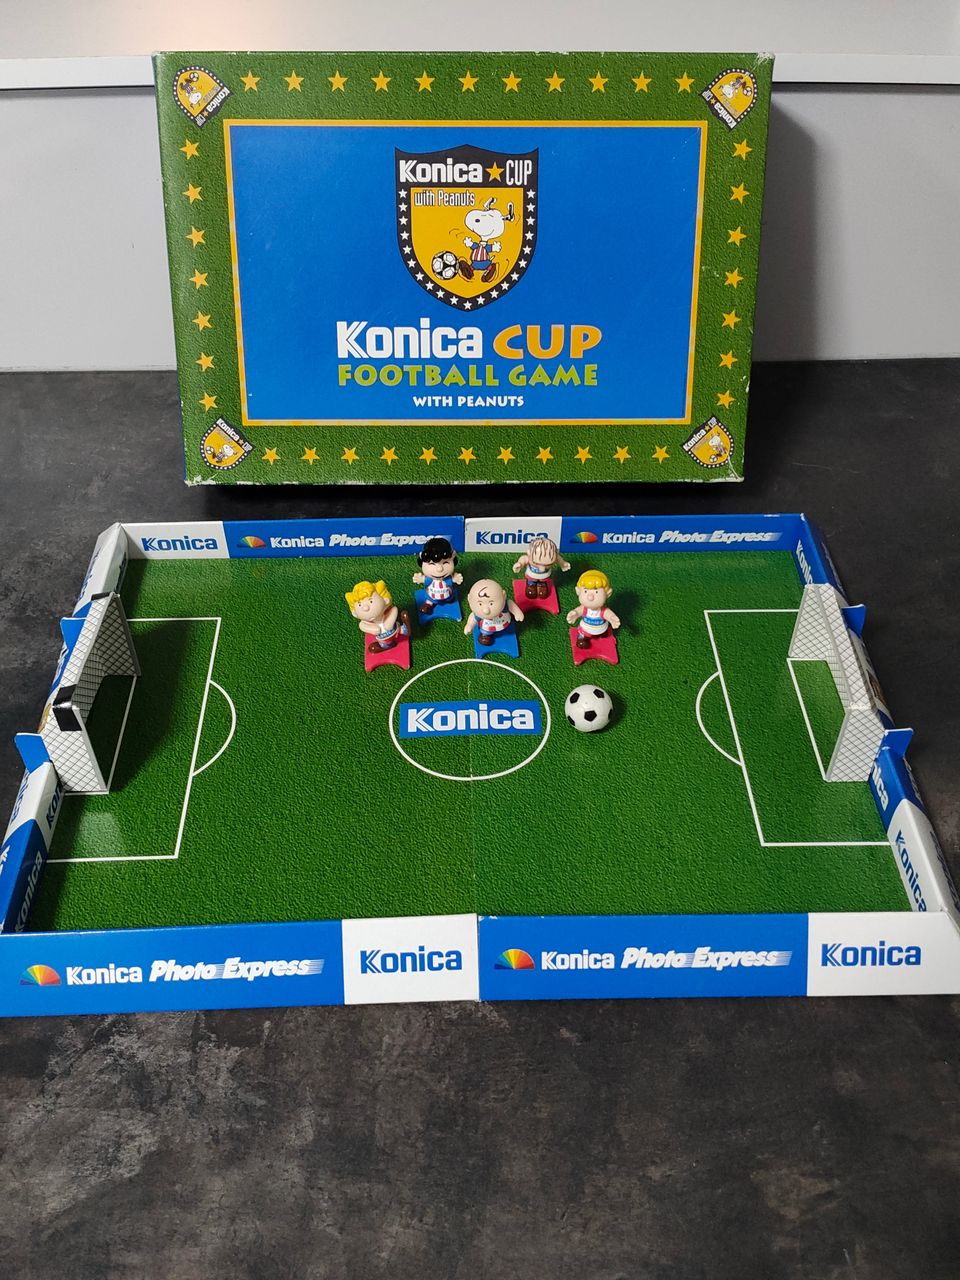 Konica Cup football game with Peanuts (Tenavat)